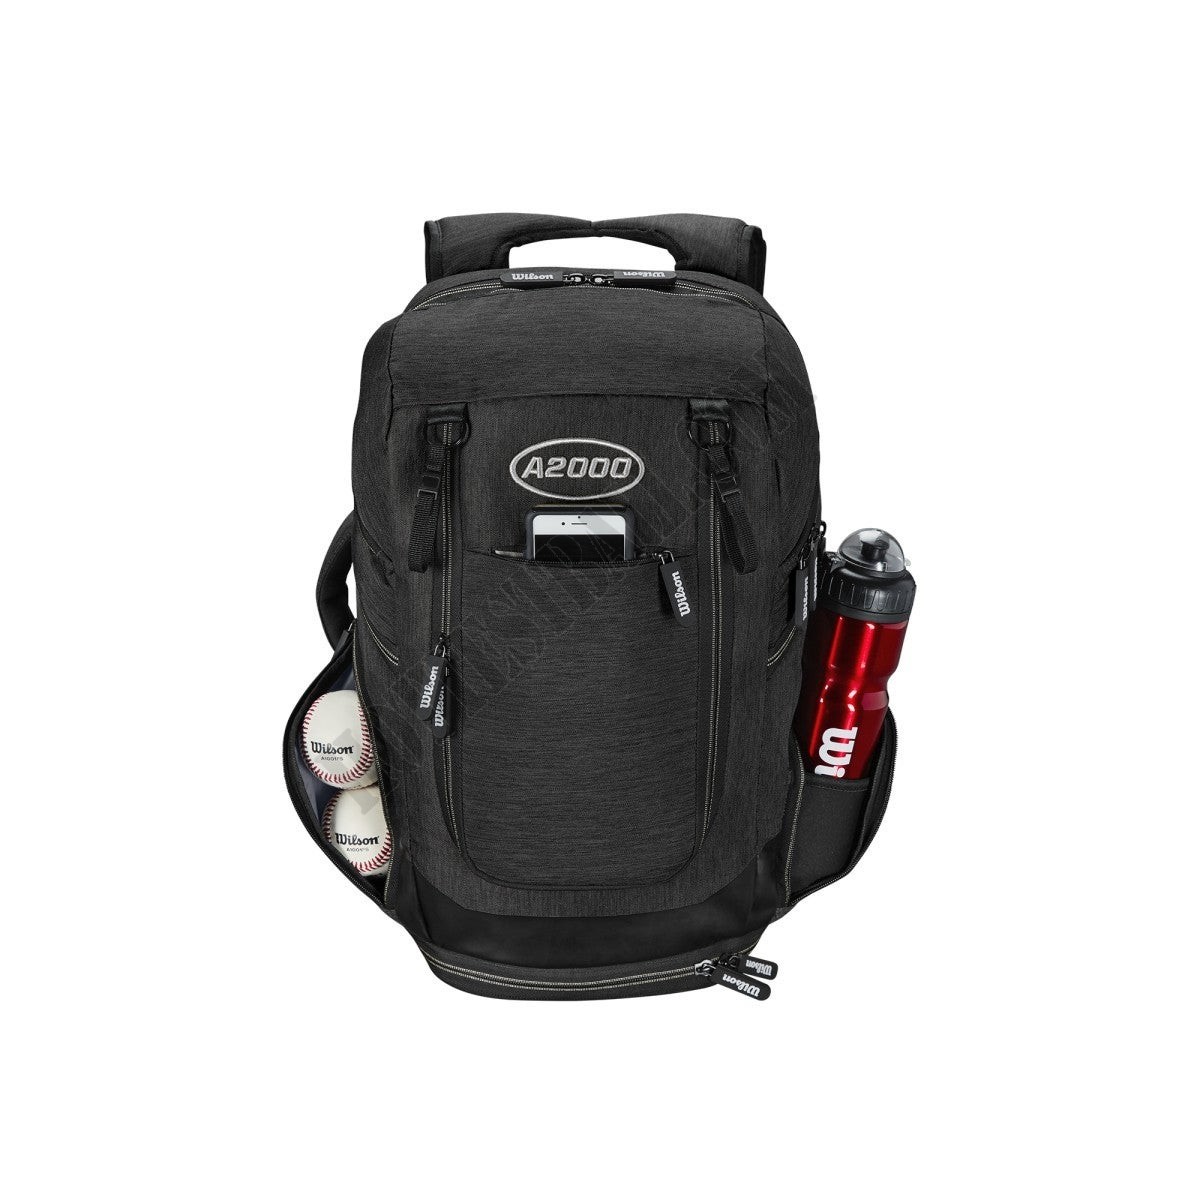 Wilson A2000 Backpack - Wilson Discount Store - -17